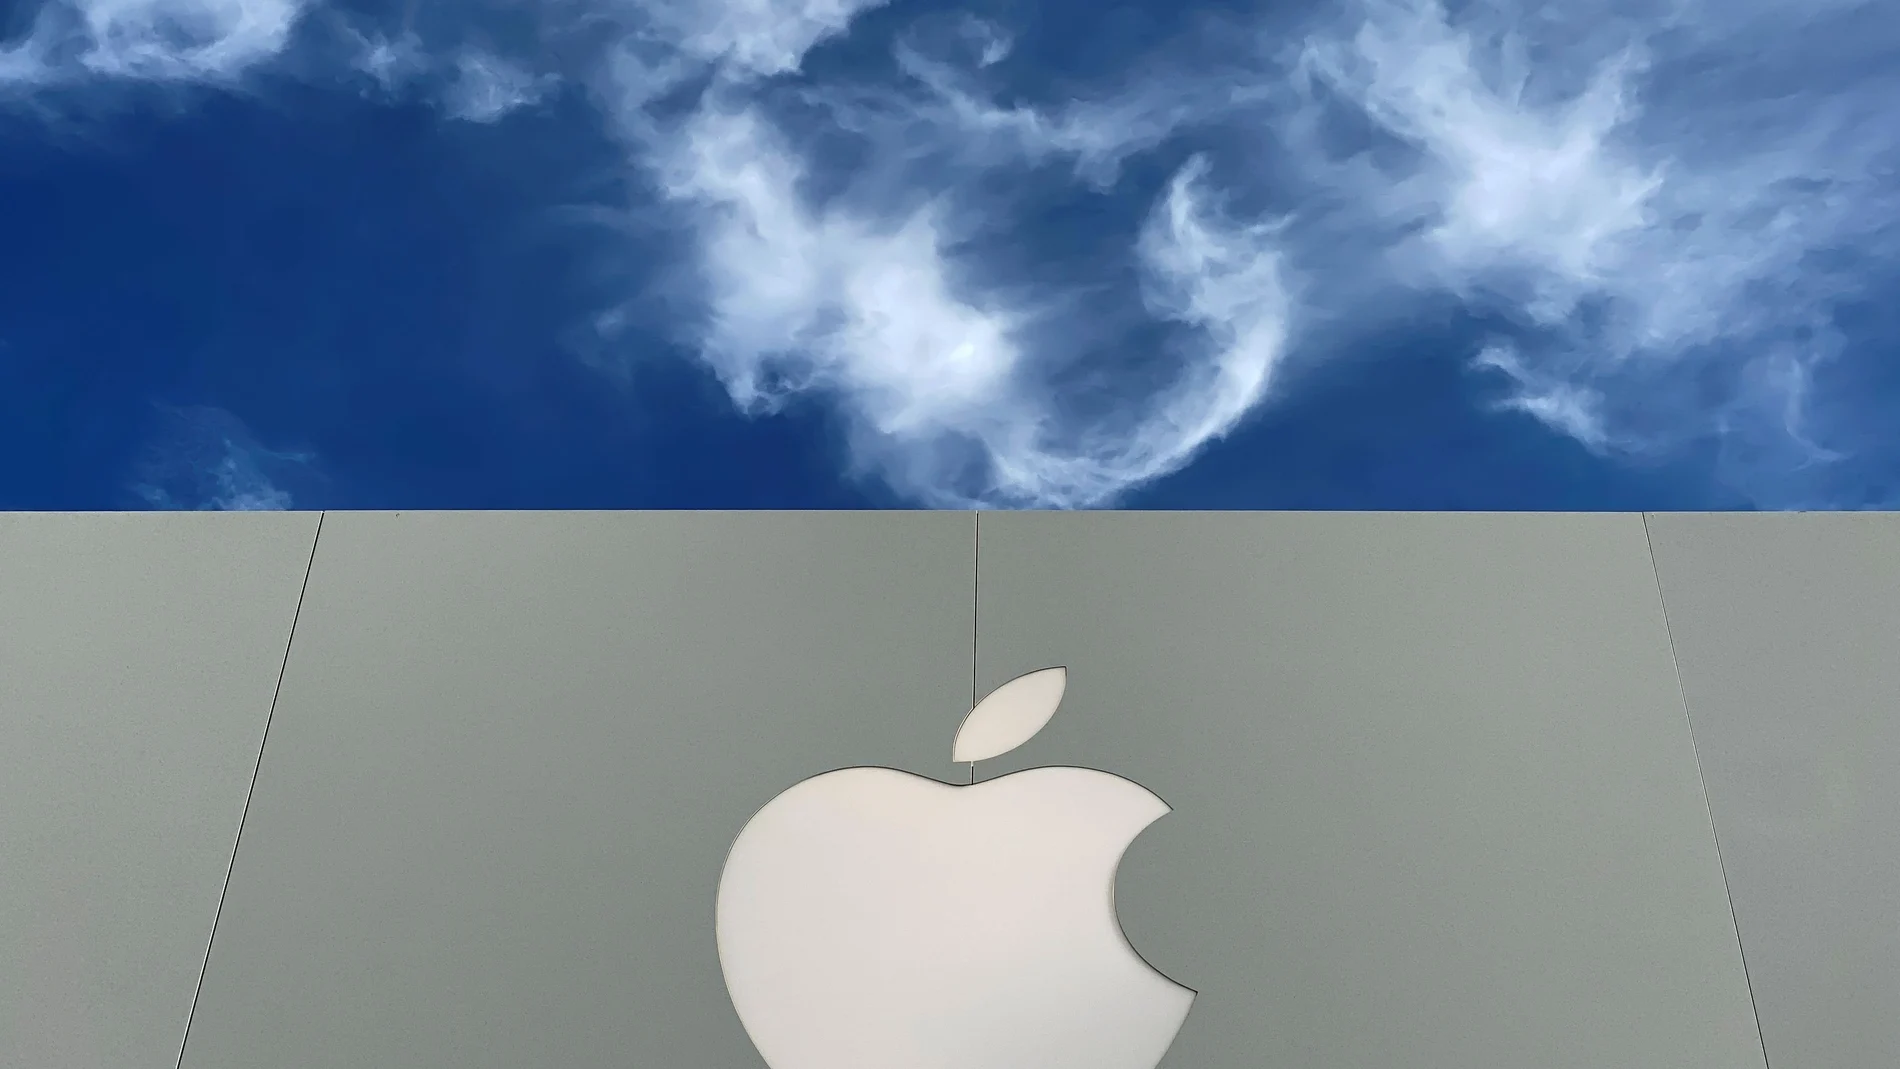 The Apple logo is shown atop an Apple store at a shopping mall in La Jolla, California